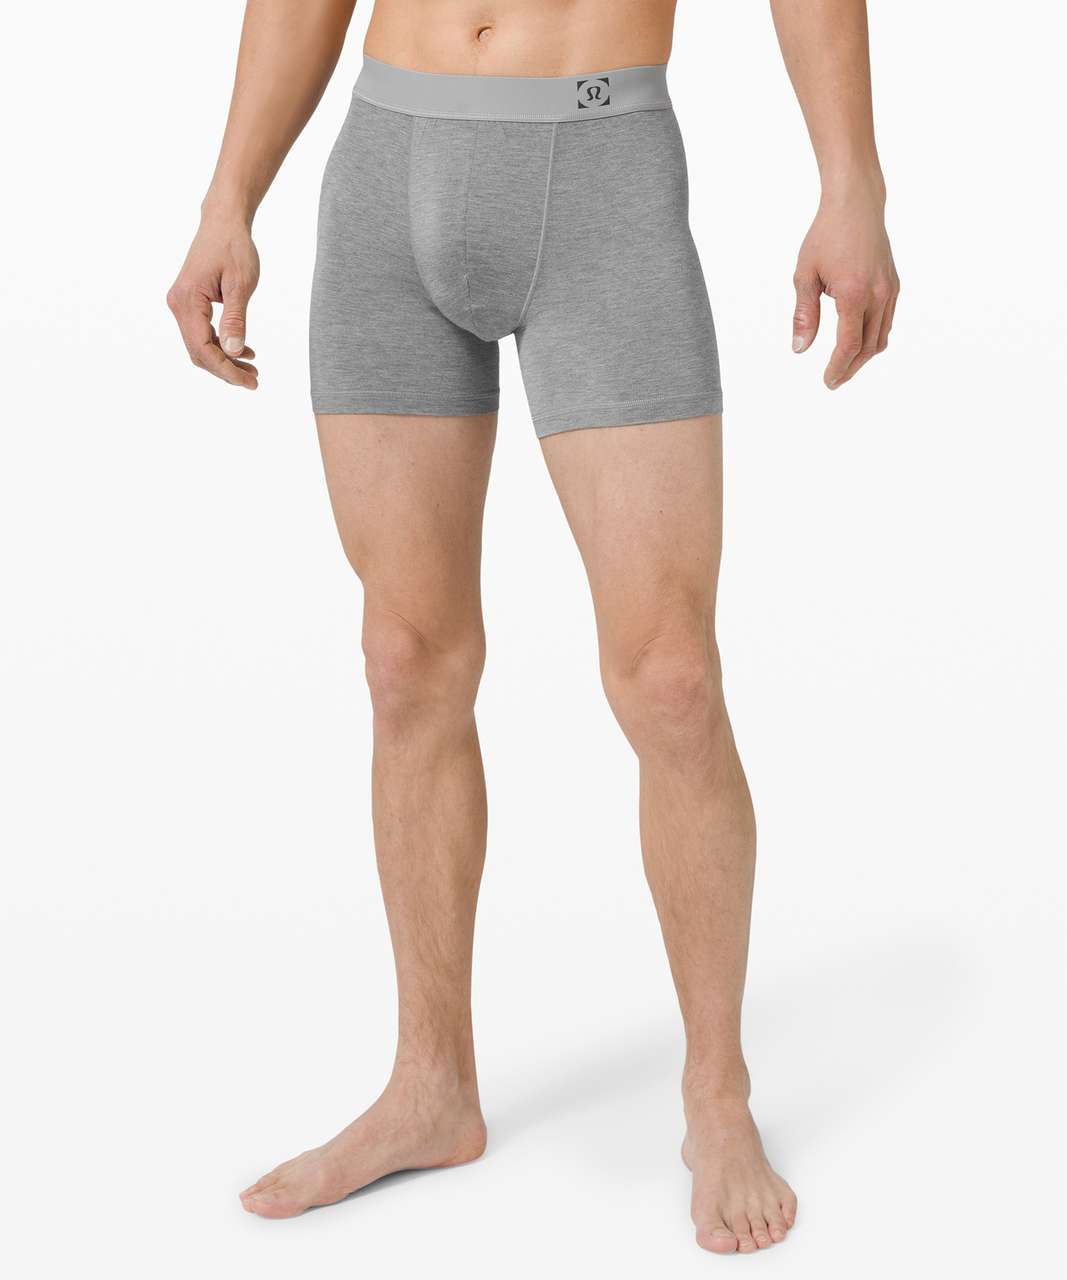 Lululemon Always in Motion Boxer 5" *5-Pack - Heathered Core Medium Grey / Black / Static Noise Cassis Smoky Red / Ink Blue